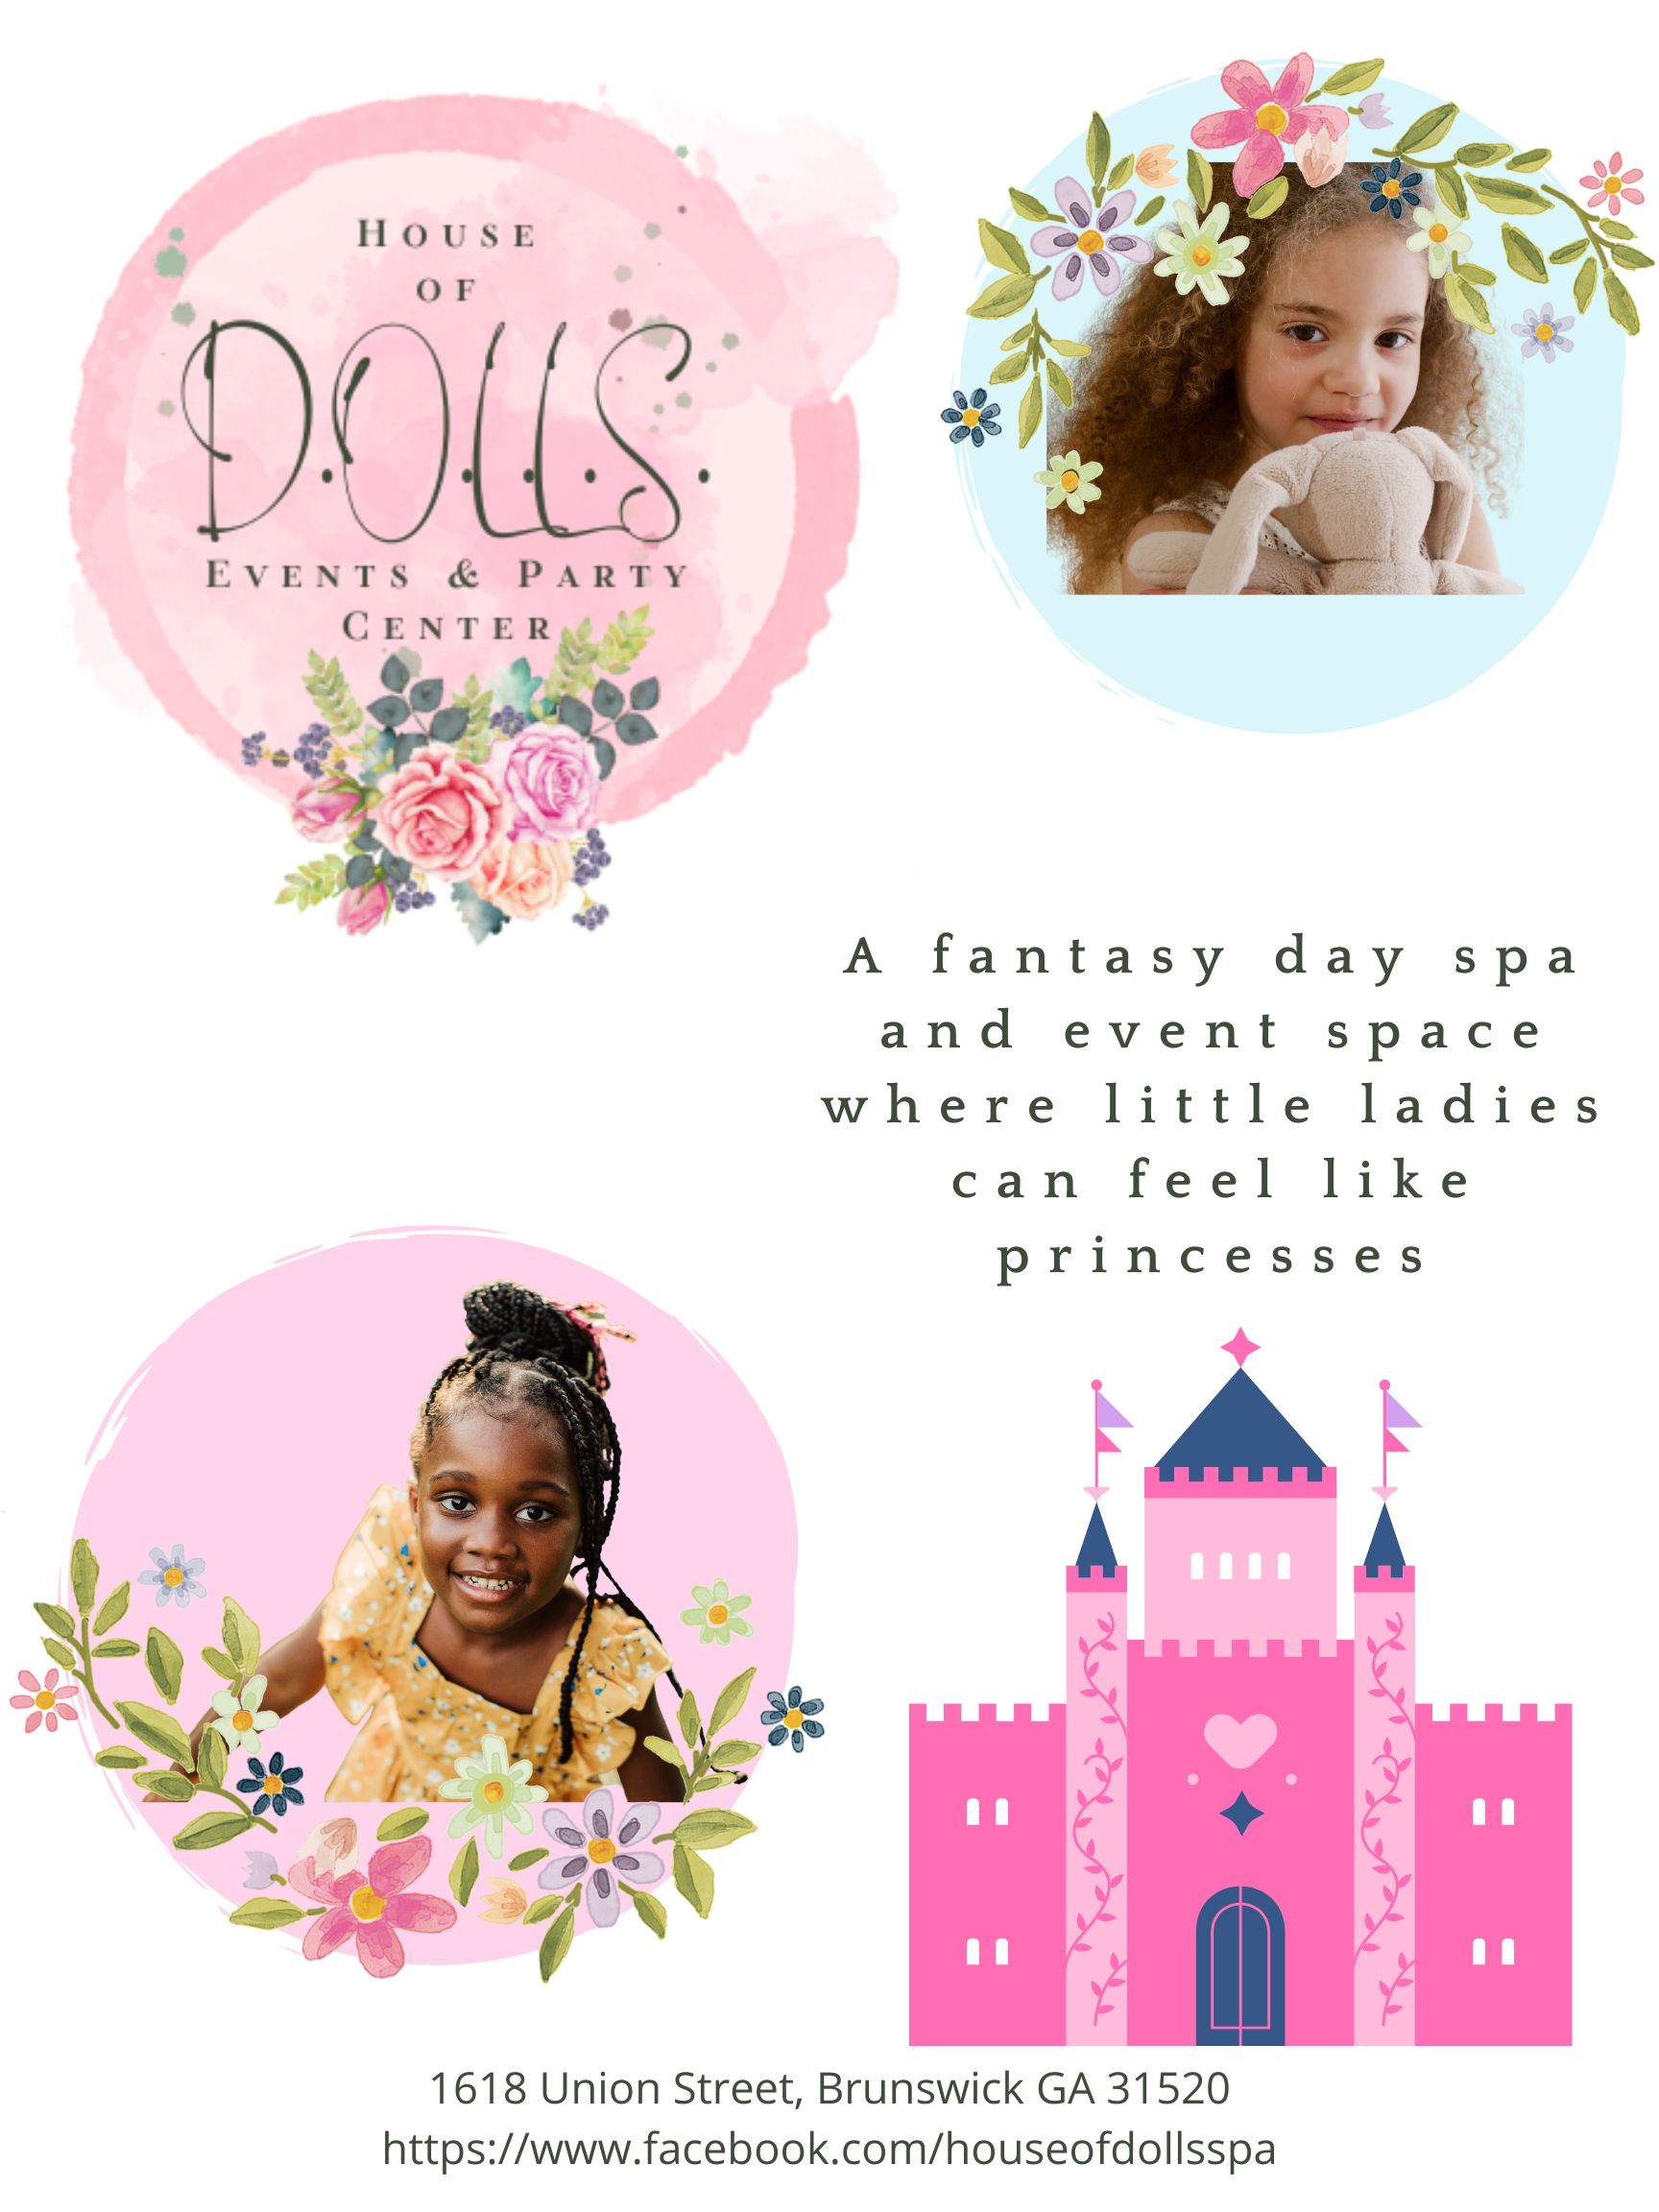 A poster for a fantasy day spa and event space where little girls can feel like princesses